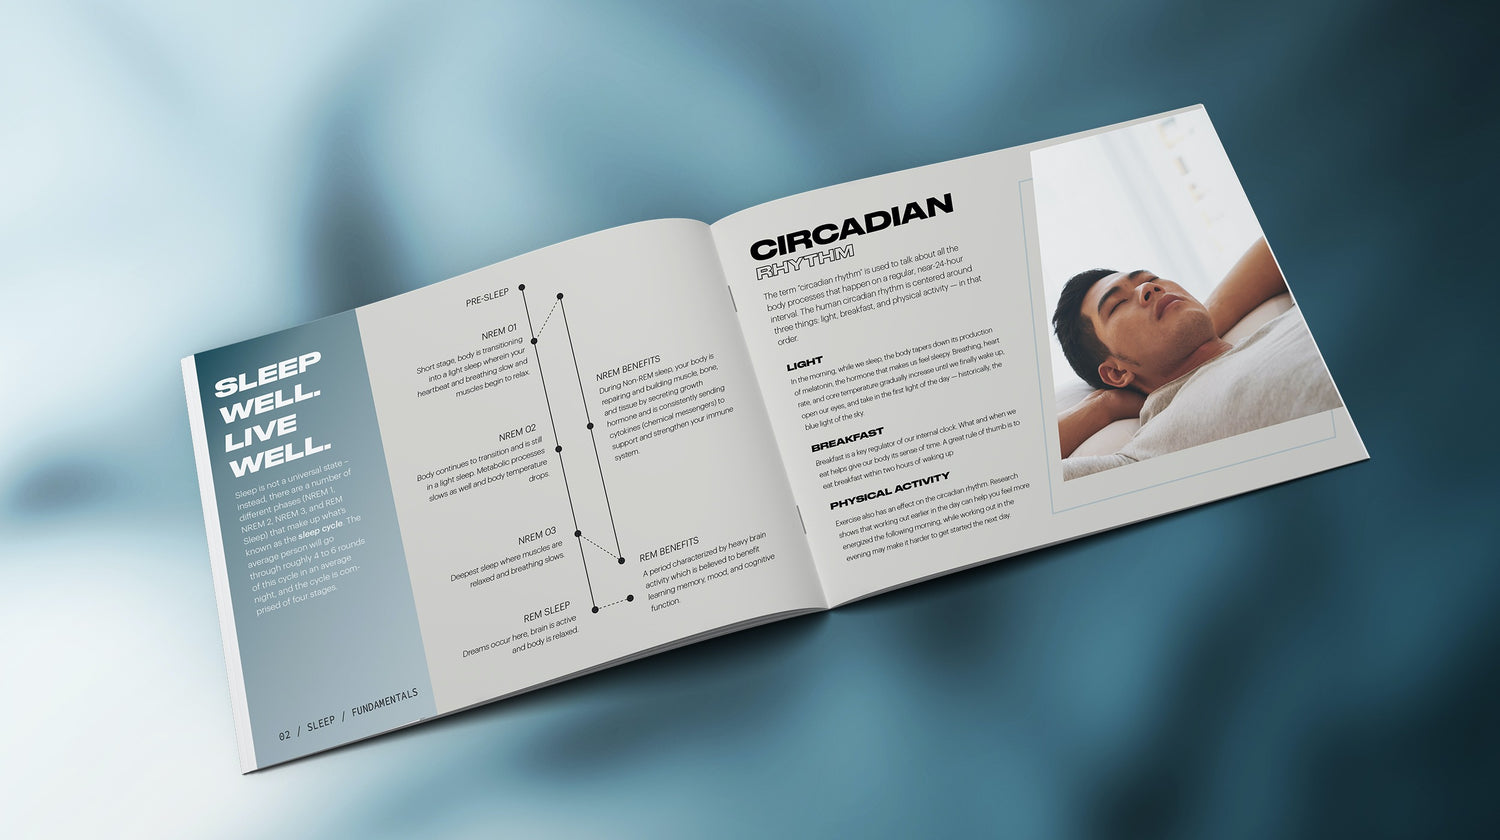 Download Our TB12 Sleep Guide!